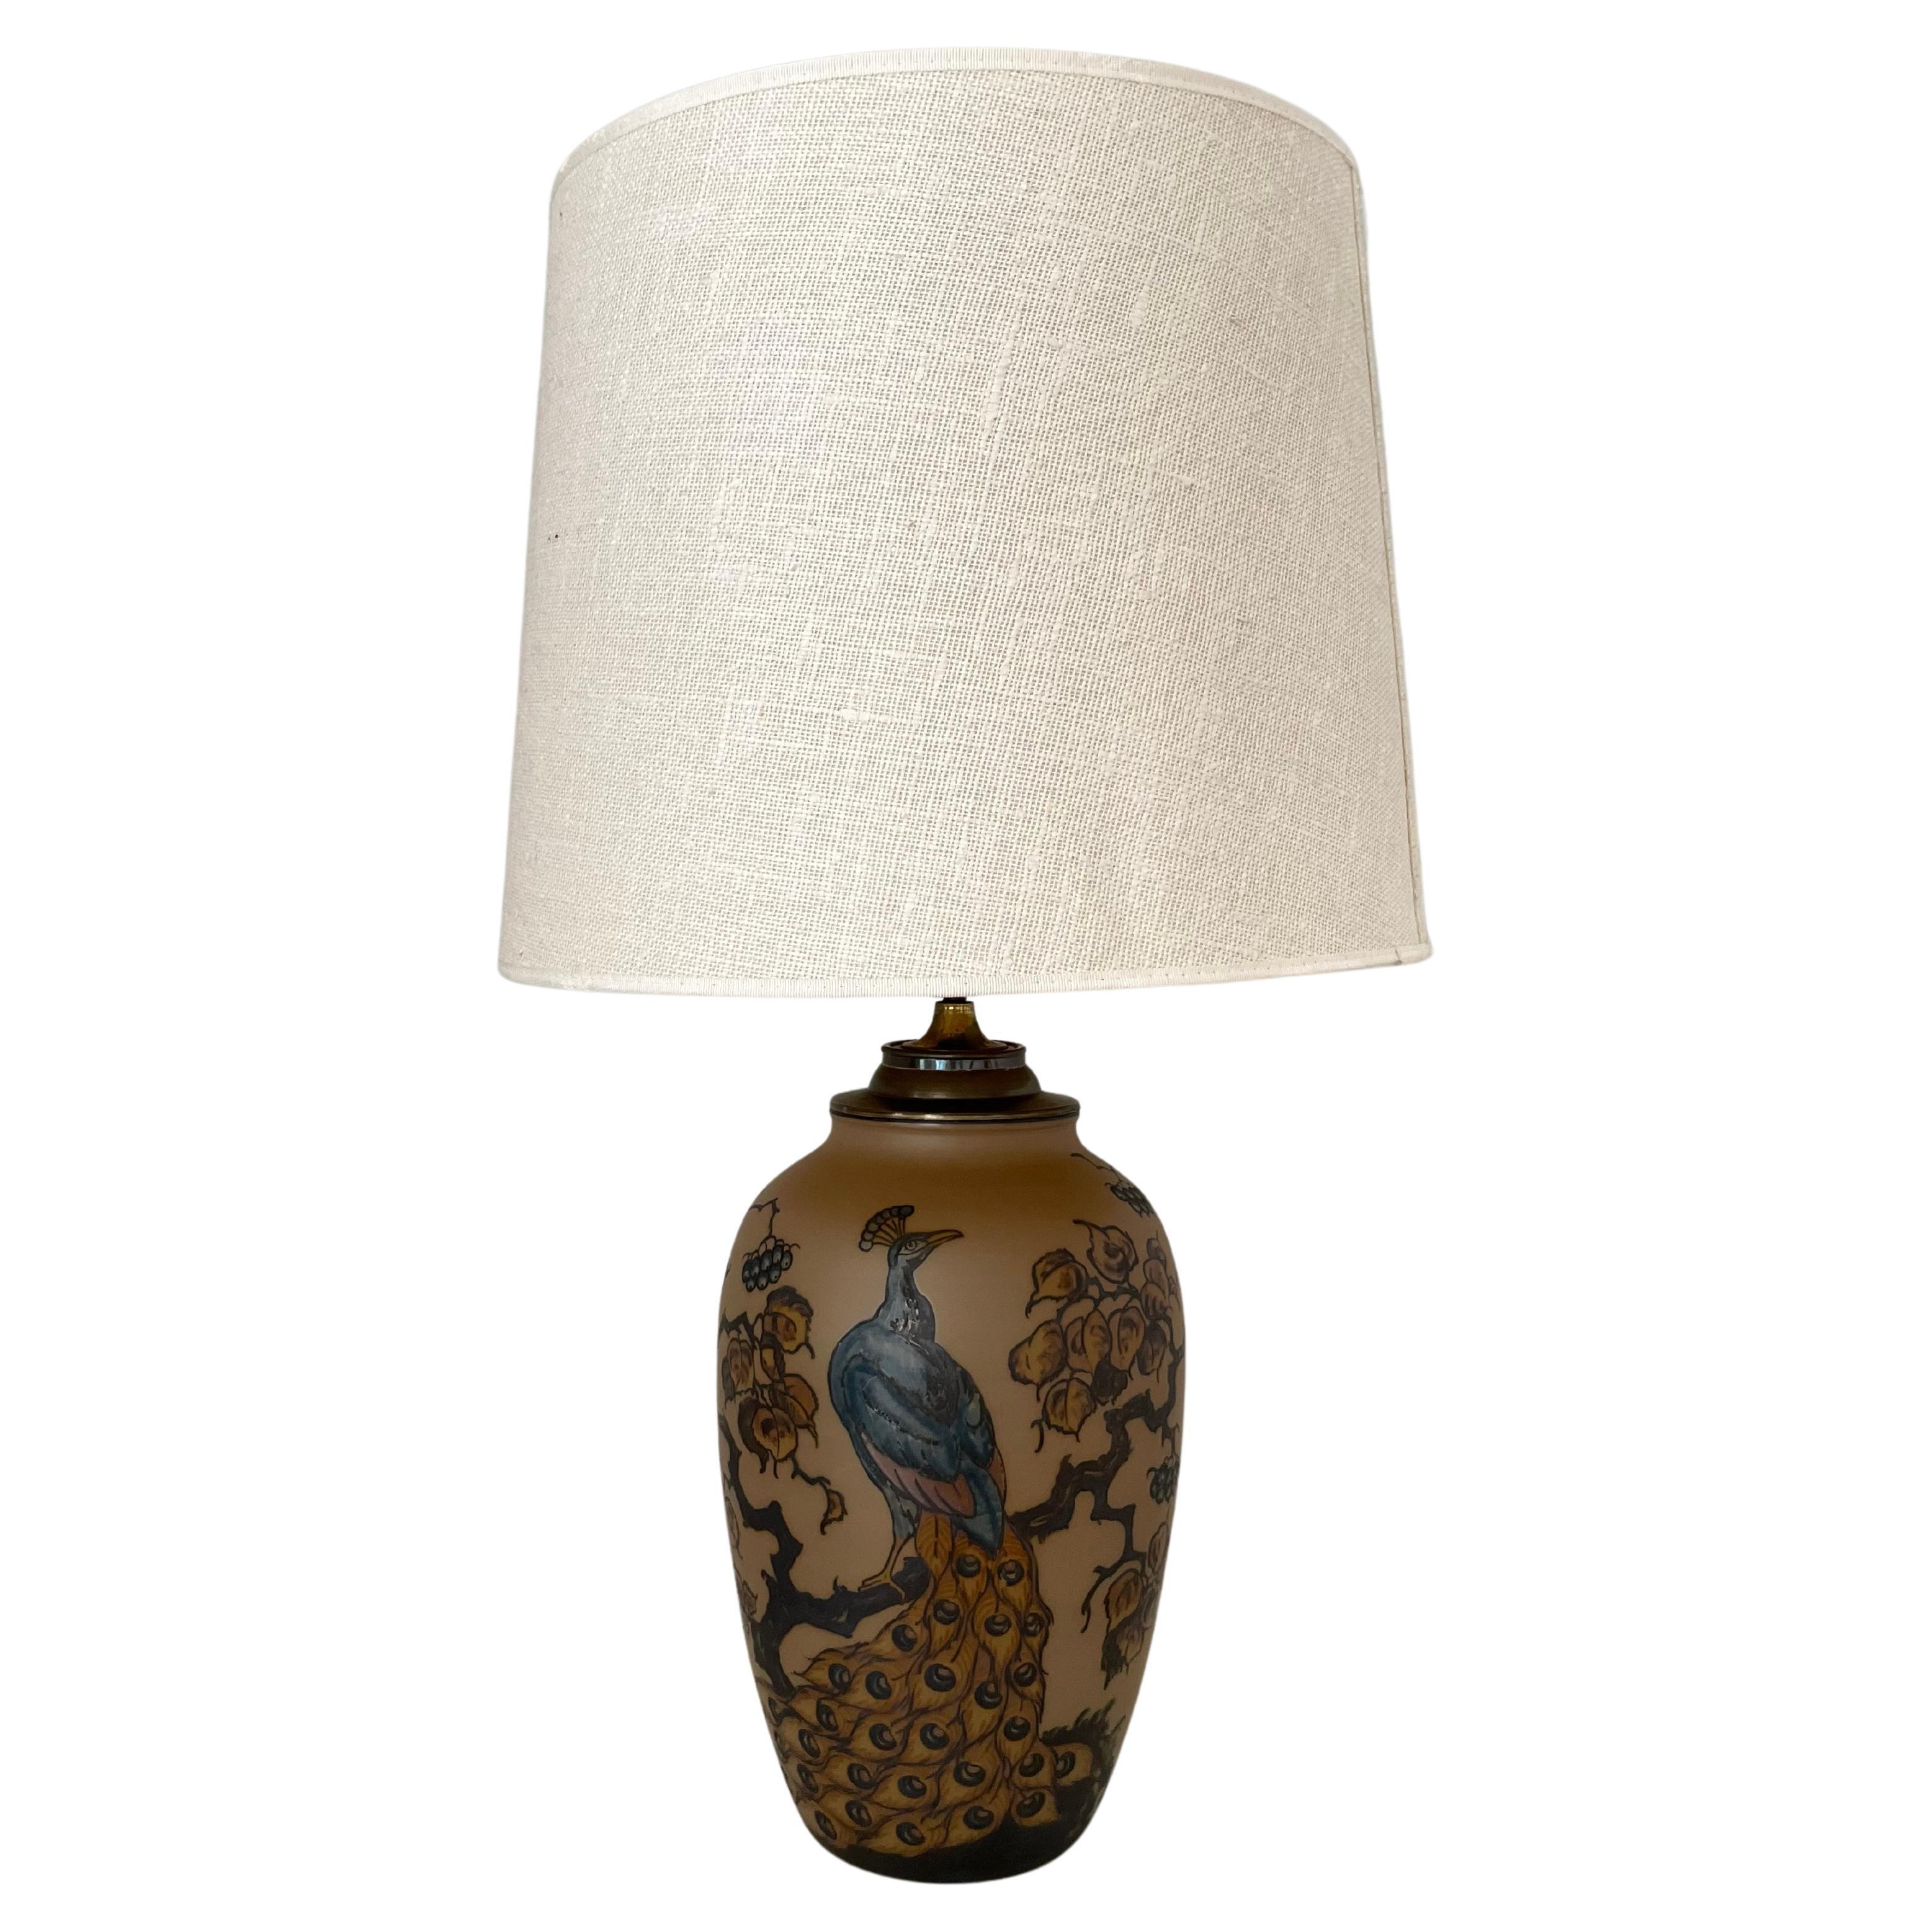 1930s Danish art nouveau ceramic table lamp decorated with peacock by L. Hjort